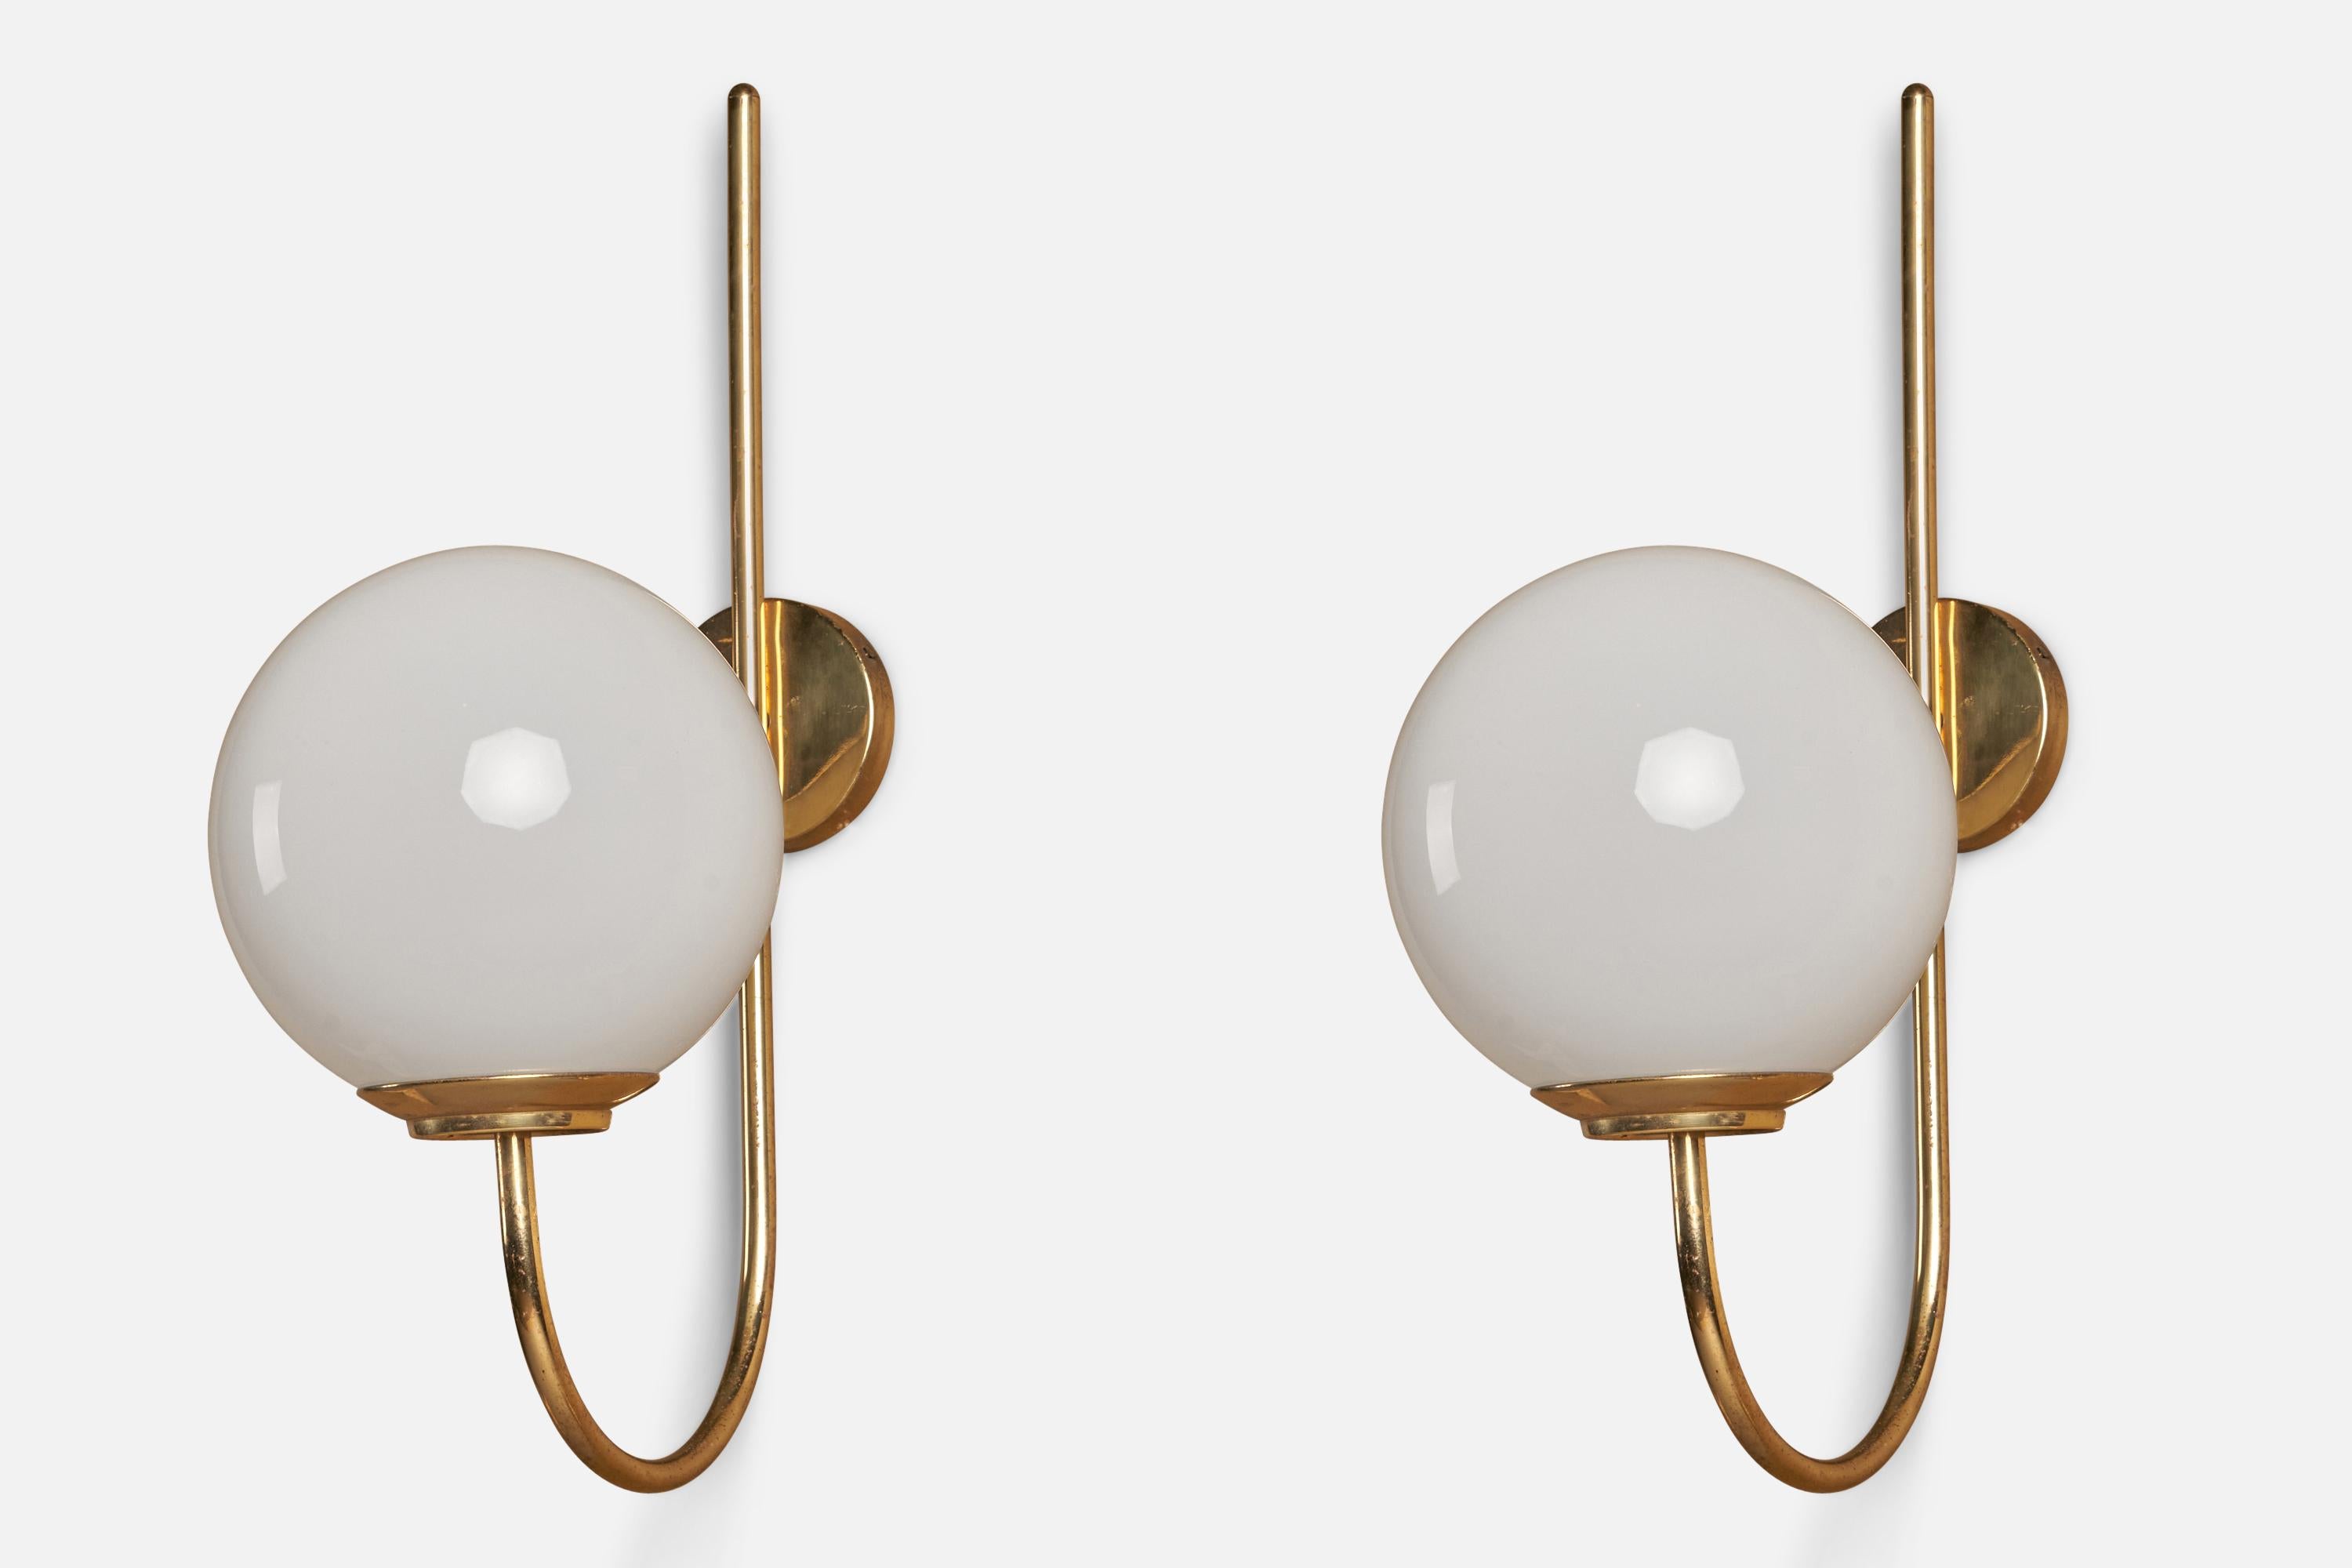 A pair of sizeable brass and opaline glass wall lights designed by Luigi Caccia Dominioni and produced by Azucena, Italy, 1950s.

Overall Dimensions (inches): 26.5